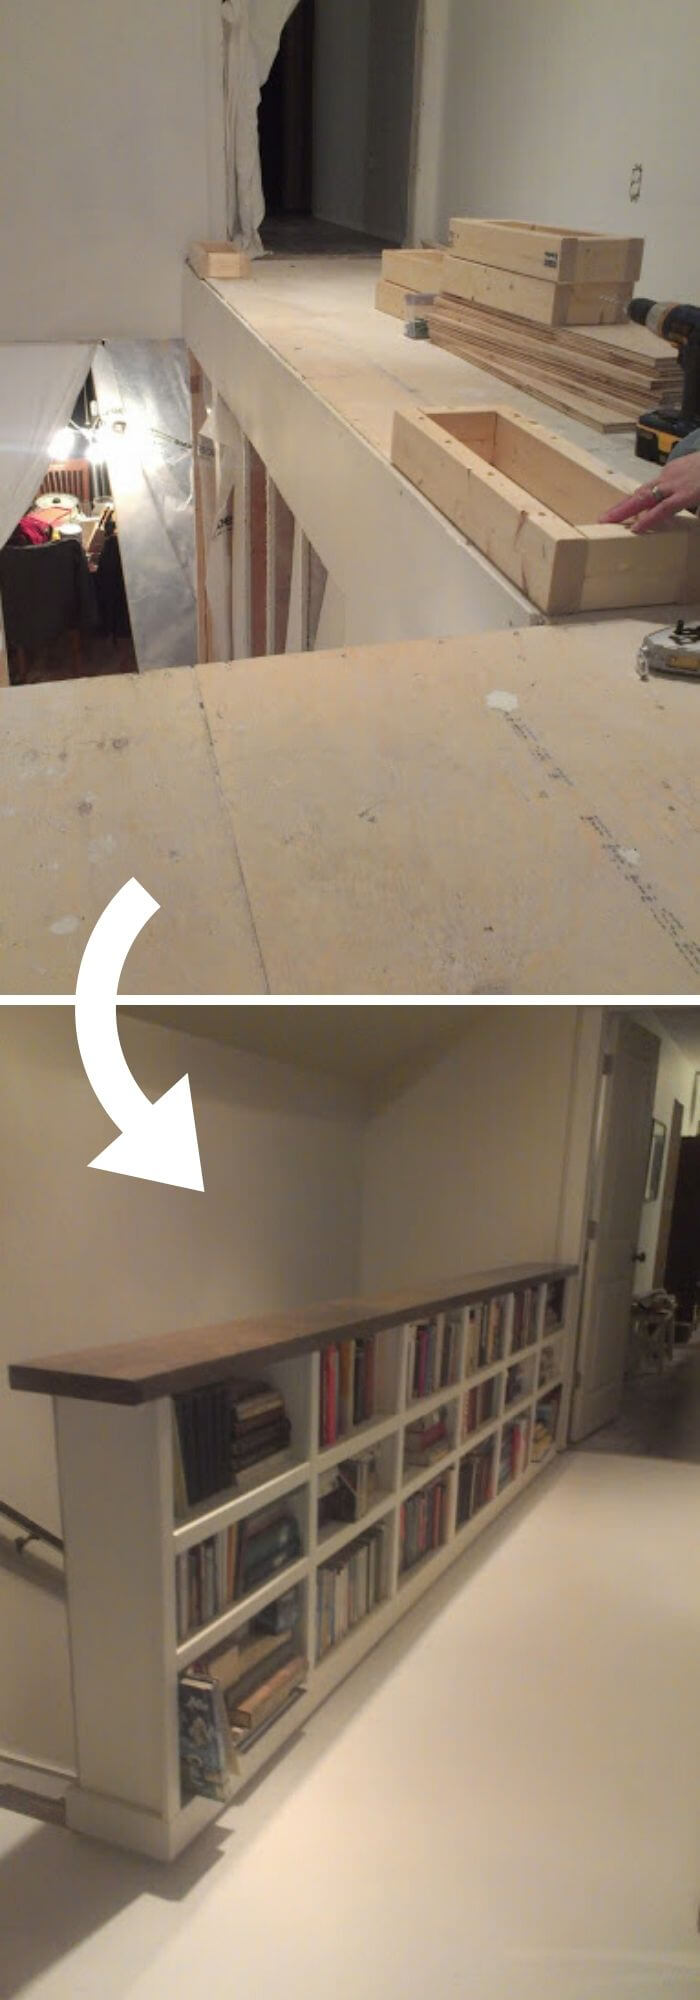 Shifting the attic staircase into a compact bookshelves